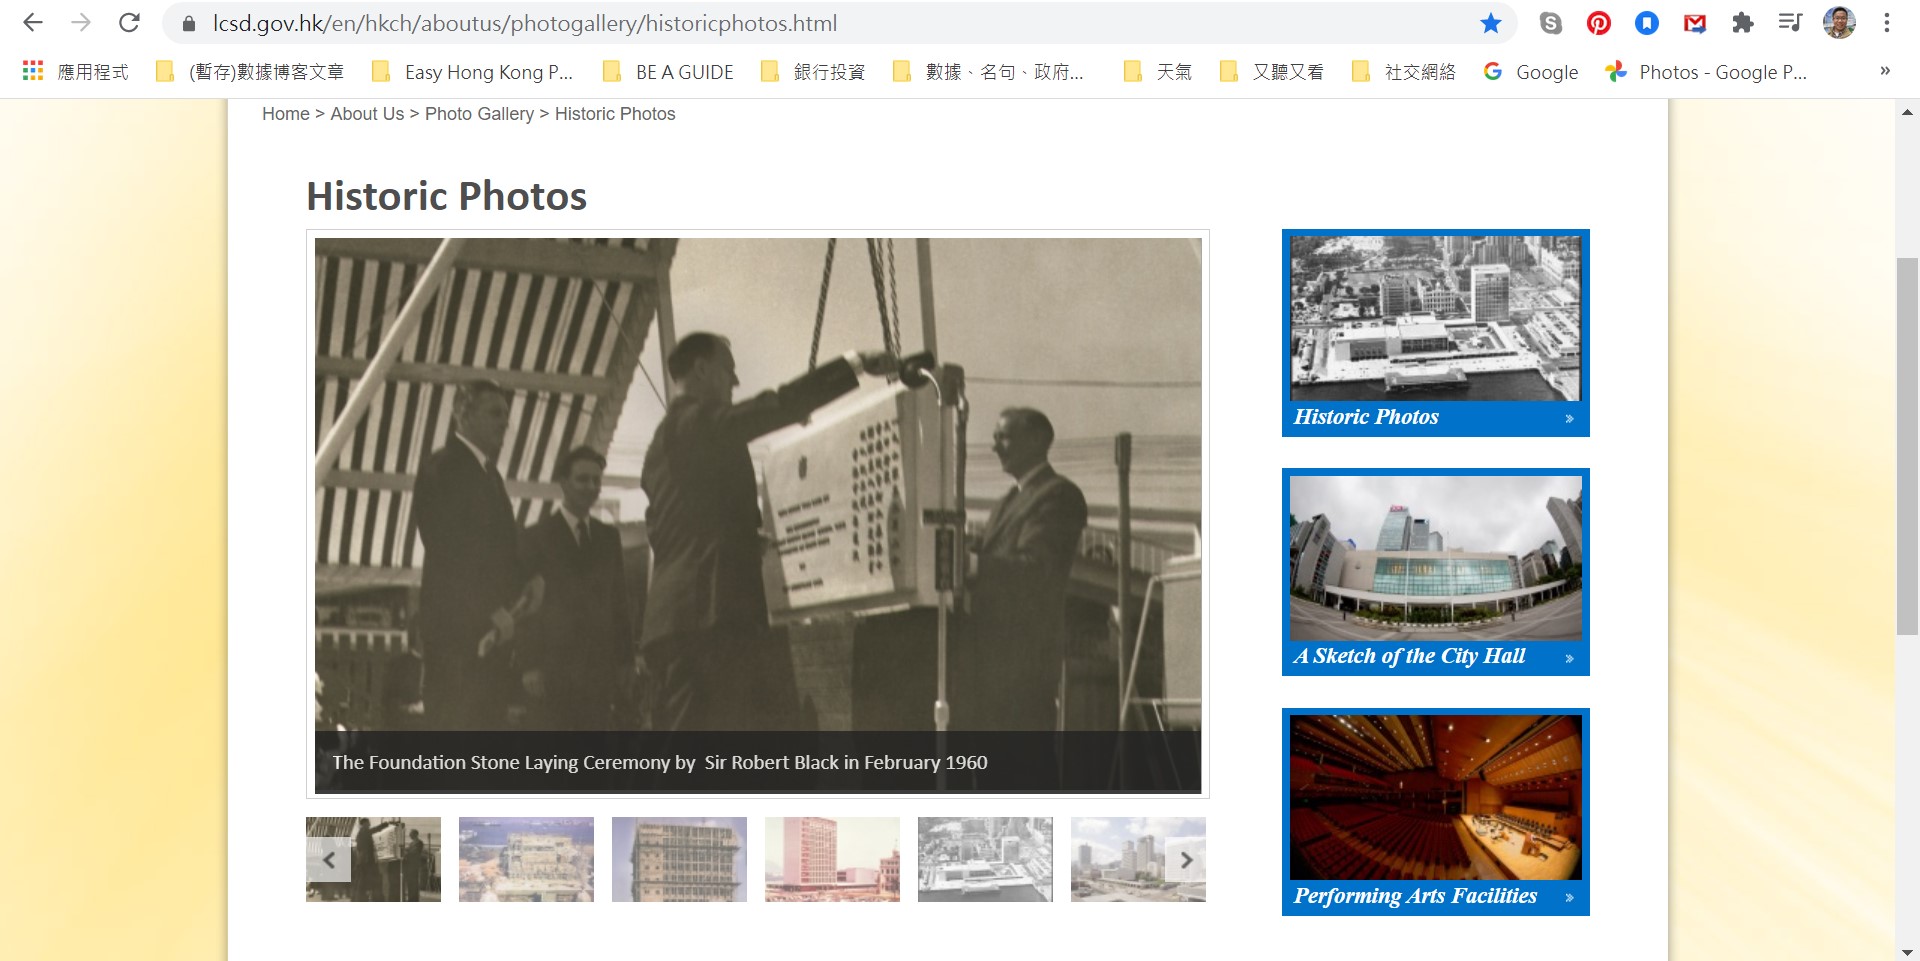 Governor Black was the VIP for the foundation stone laying ceremony for Hong Kong City Hall on 25 Feb 1960. Screenshot of Hong Kong City Hall website.